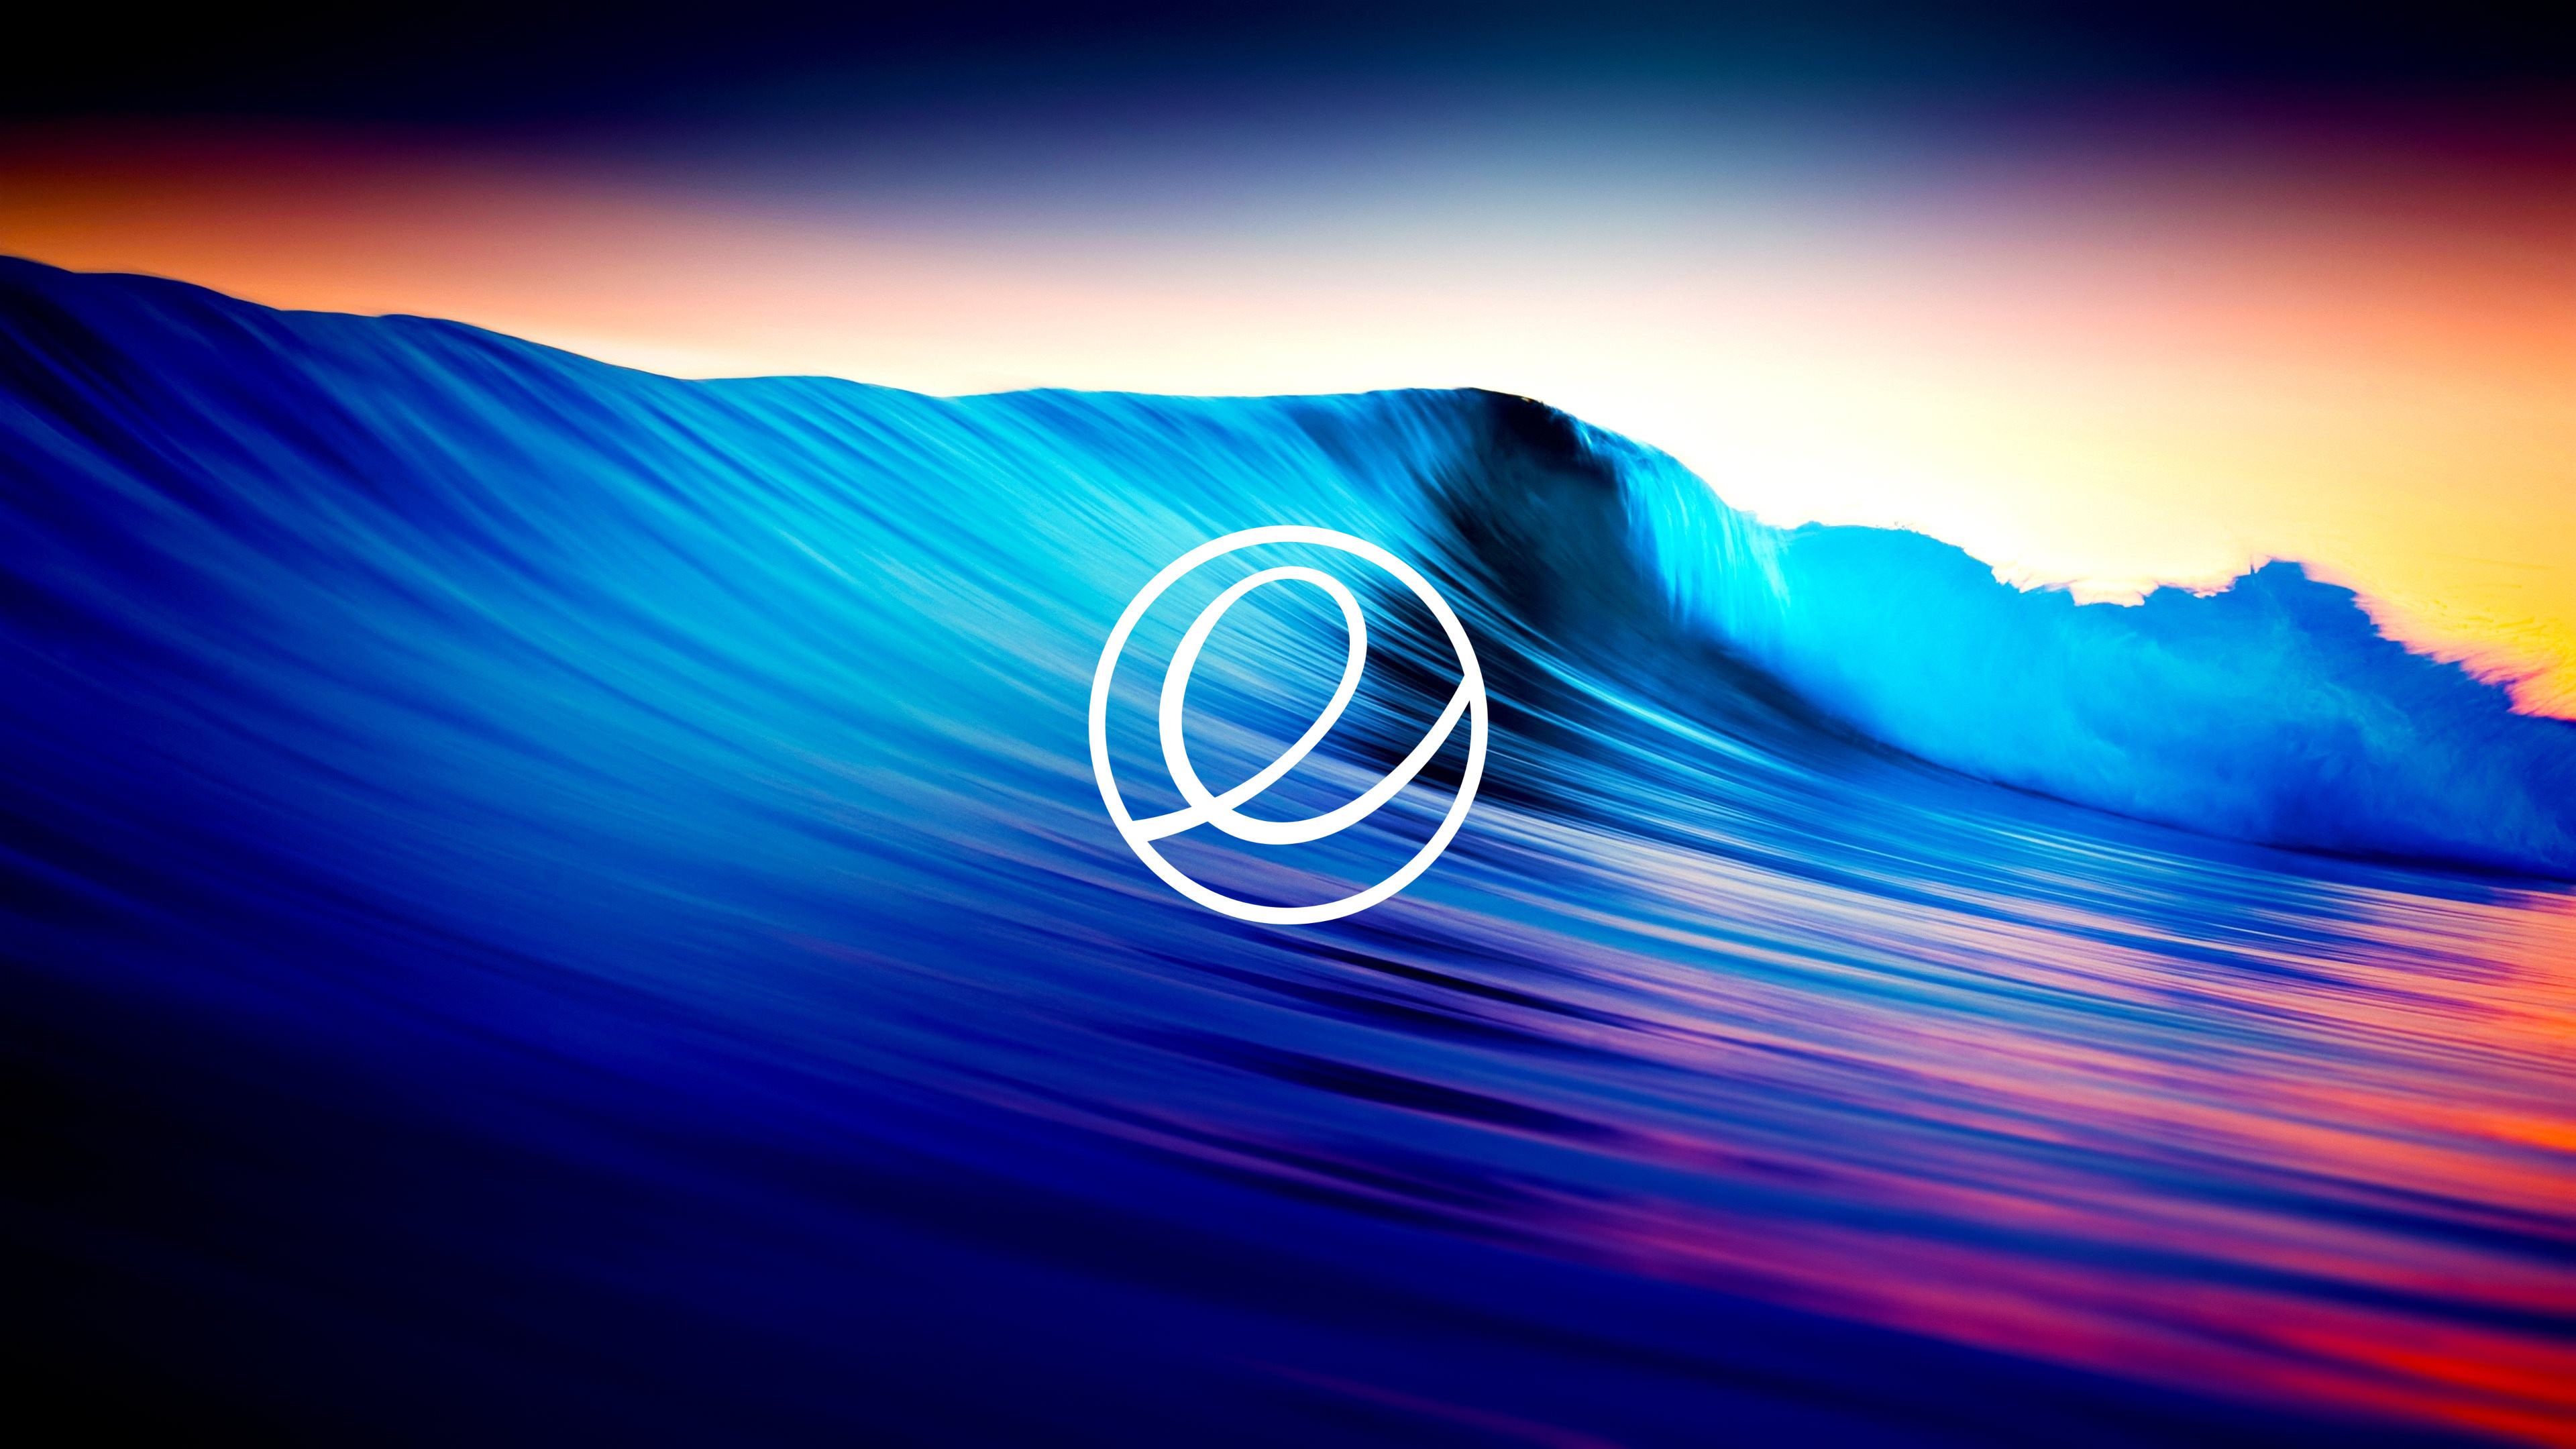 Elementary Os Wallpapers